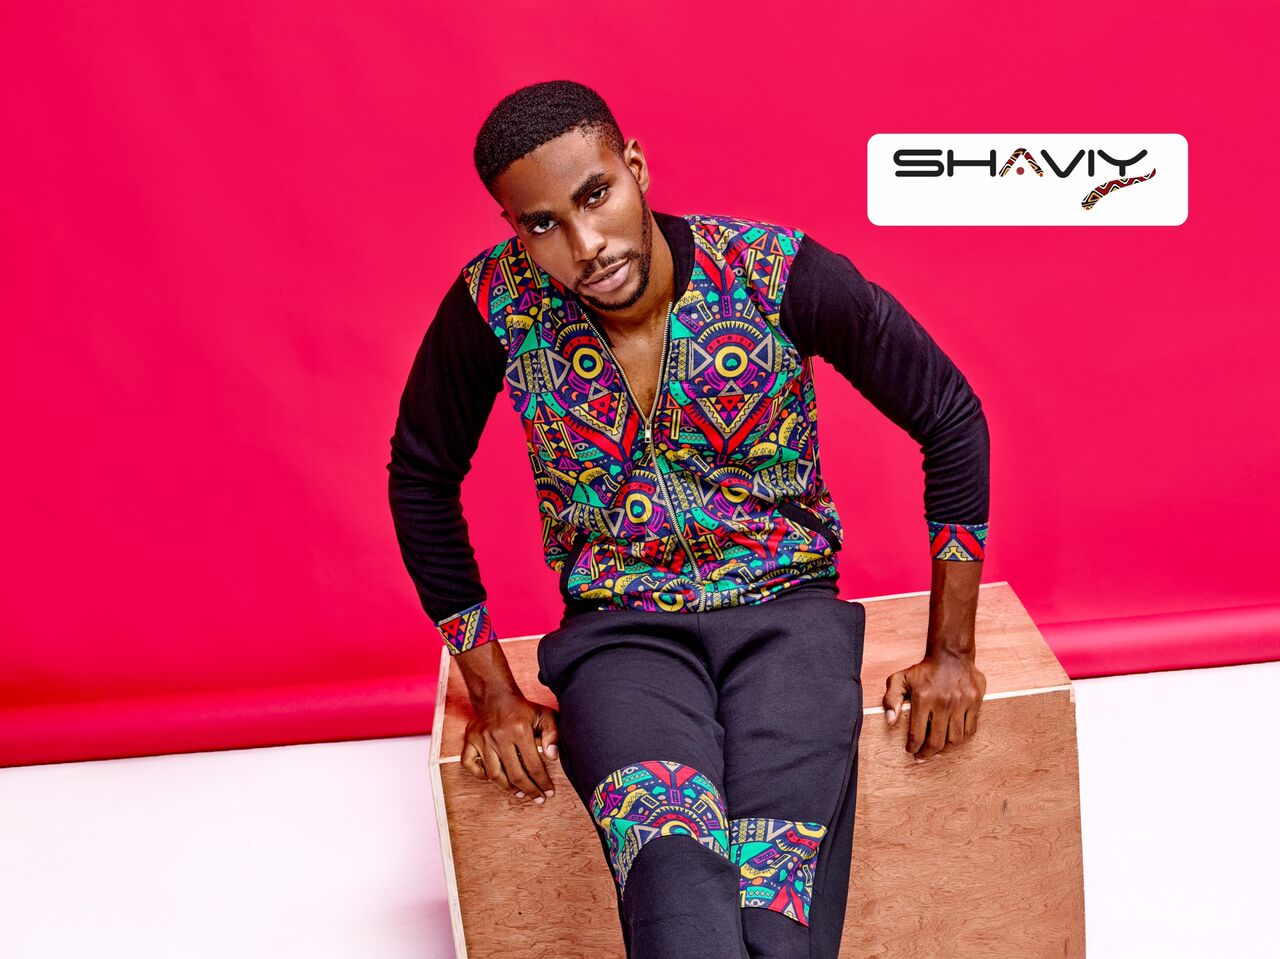 Love Active Wear? Shaviy’s Latest Collection is For You